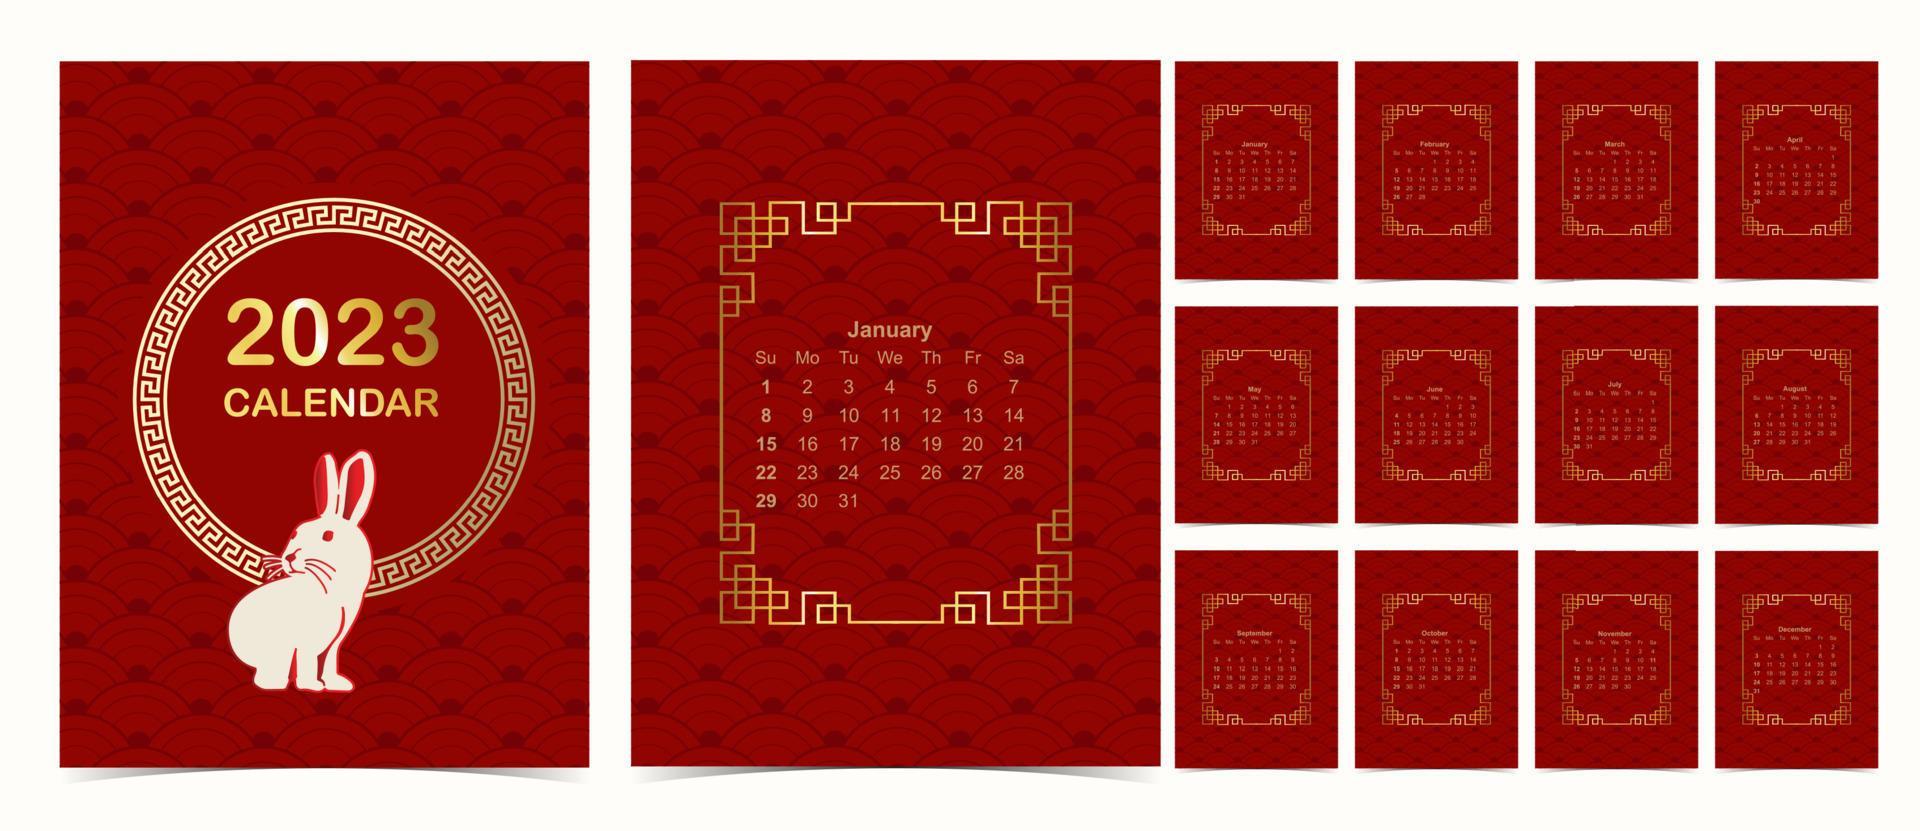 2023-red-table-calendar-week-start-on-sunday-with-chinese-pattern